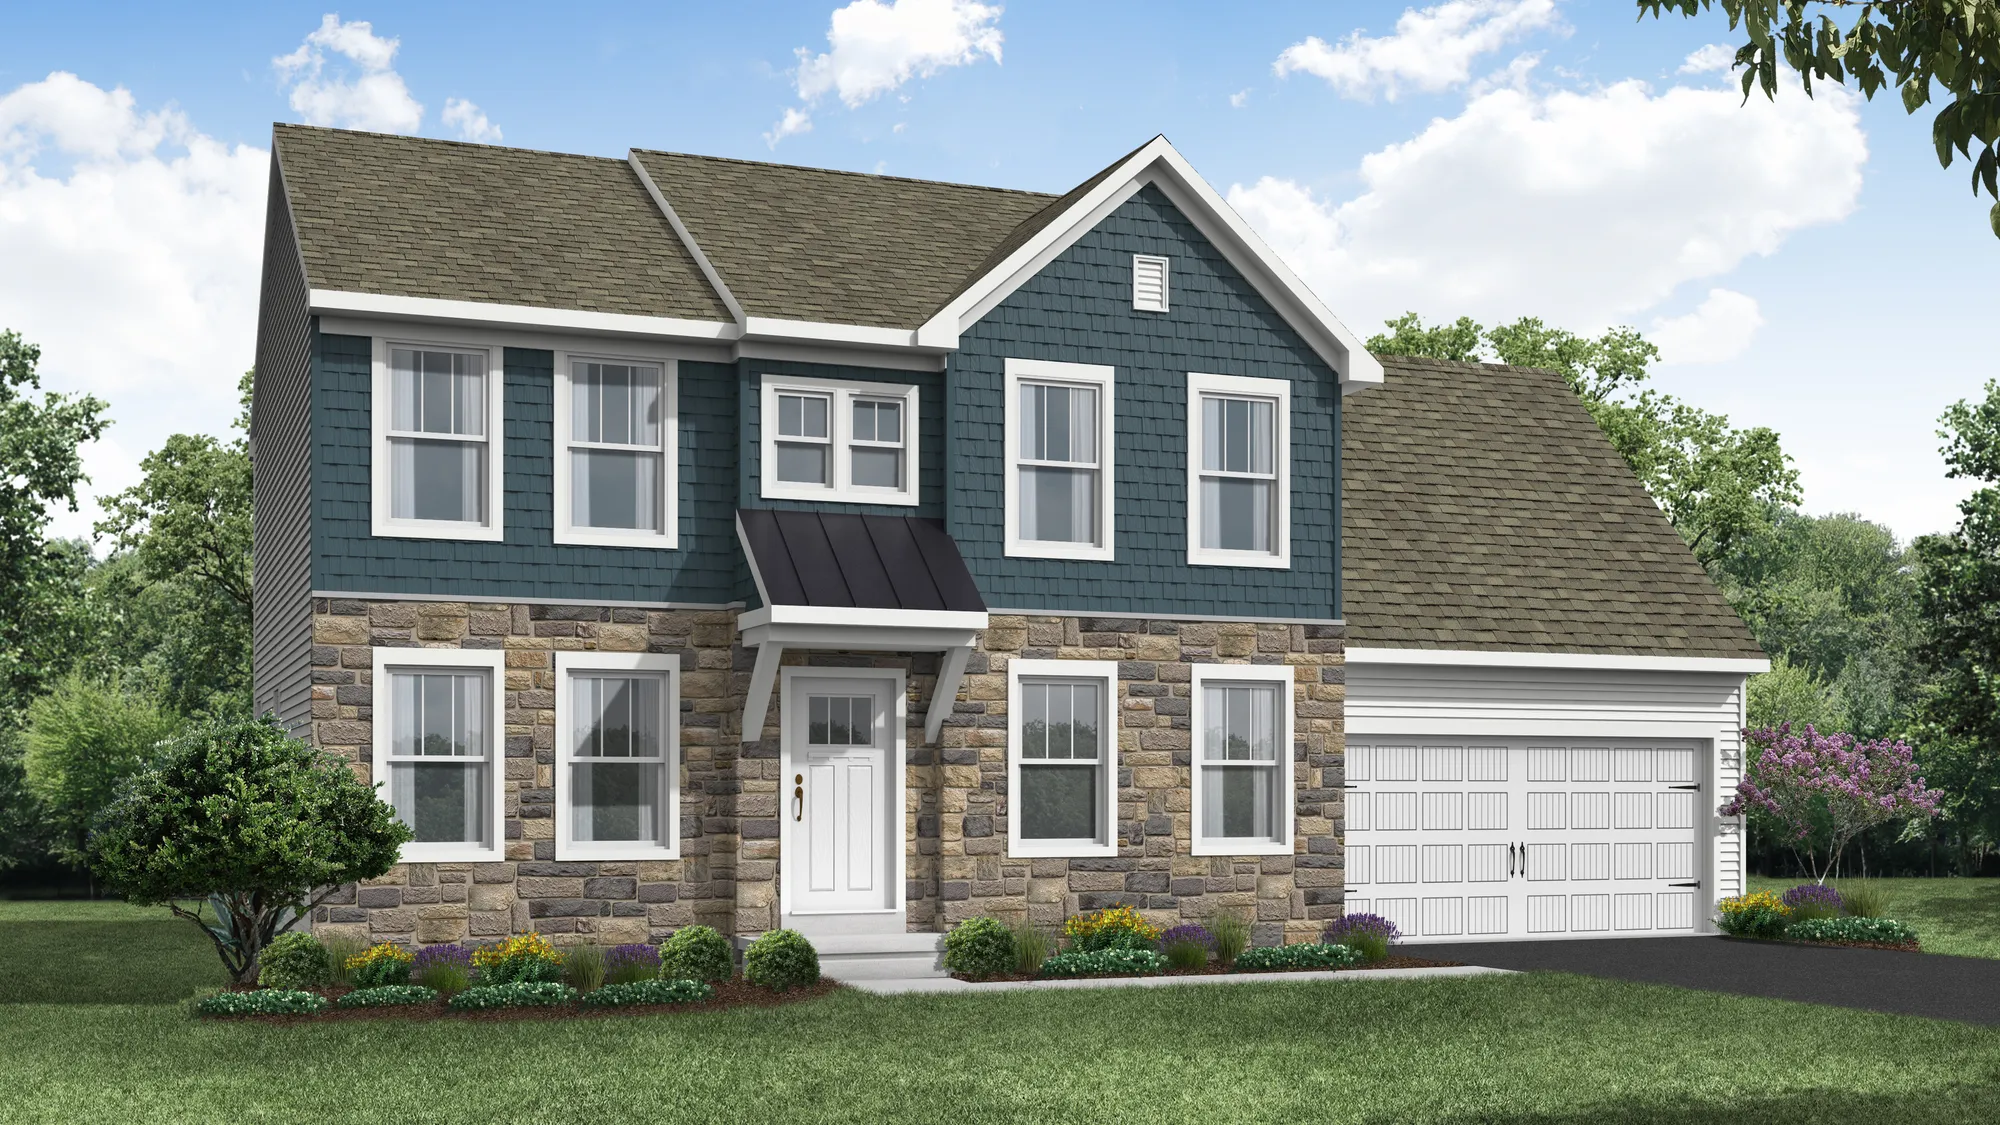 Front elevation of the Ambrook model from Garman Builders